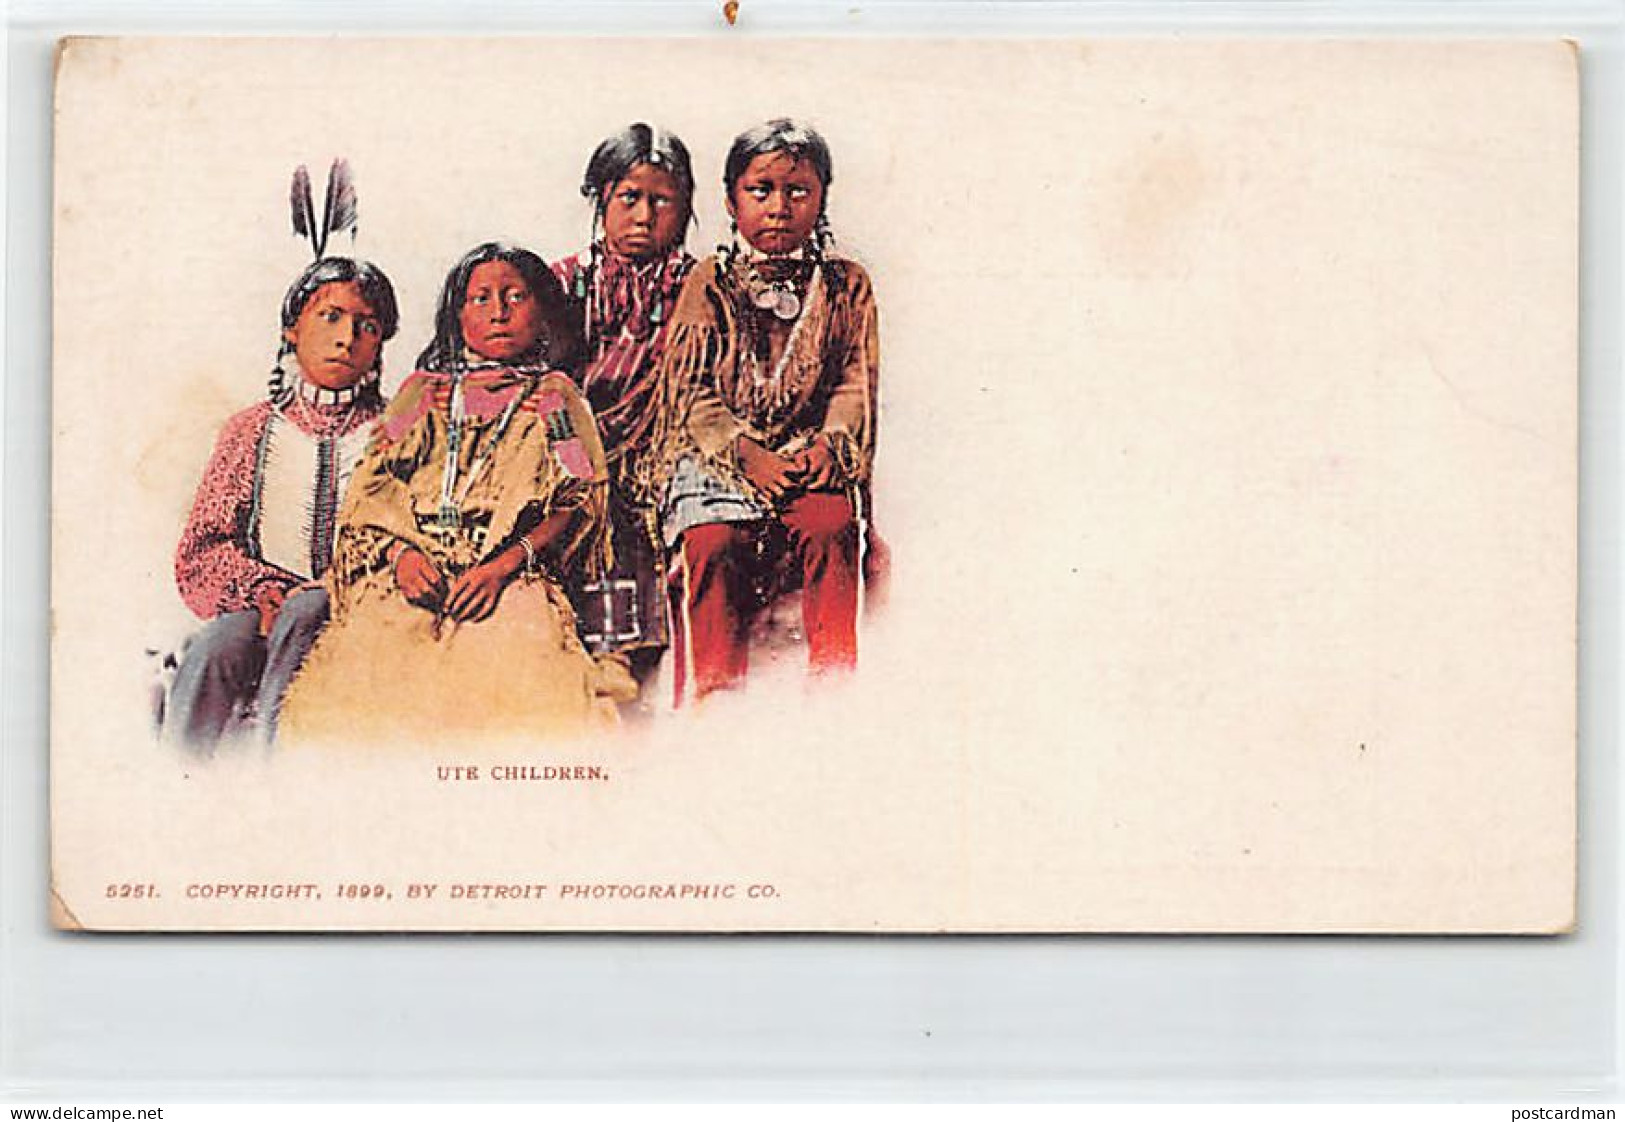 Usa - Native Americans - Ute Children - Publ. Detroit Photographic Co. 5251 - PRIVATE MAILING CARD - Indianer